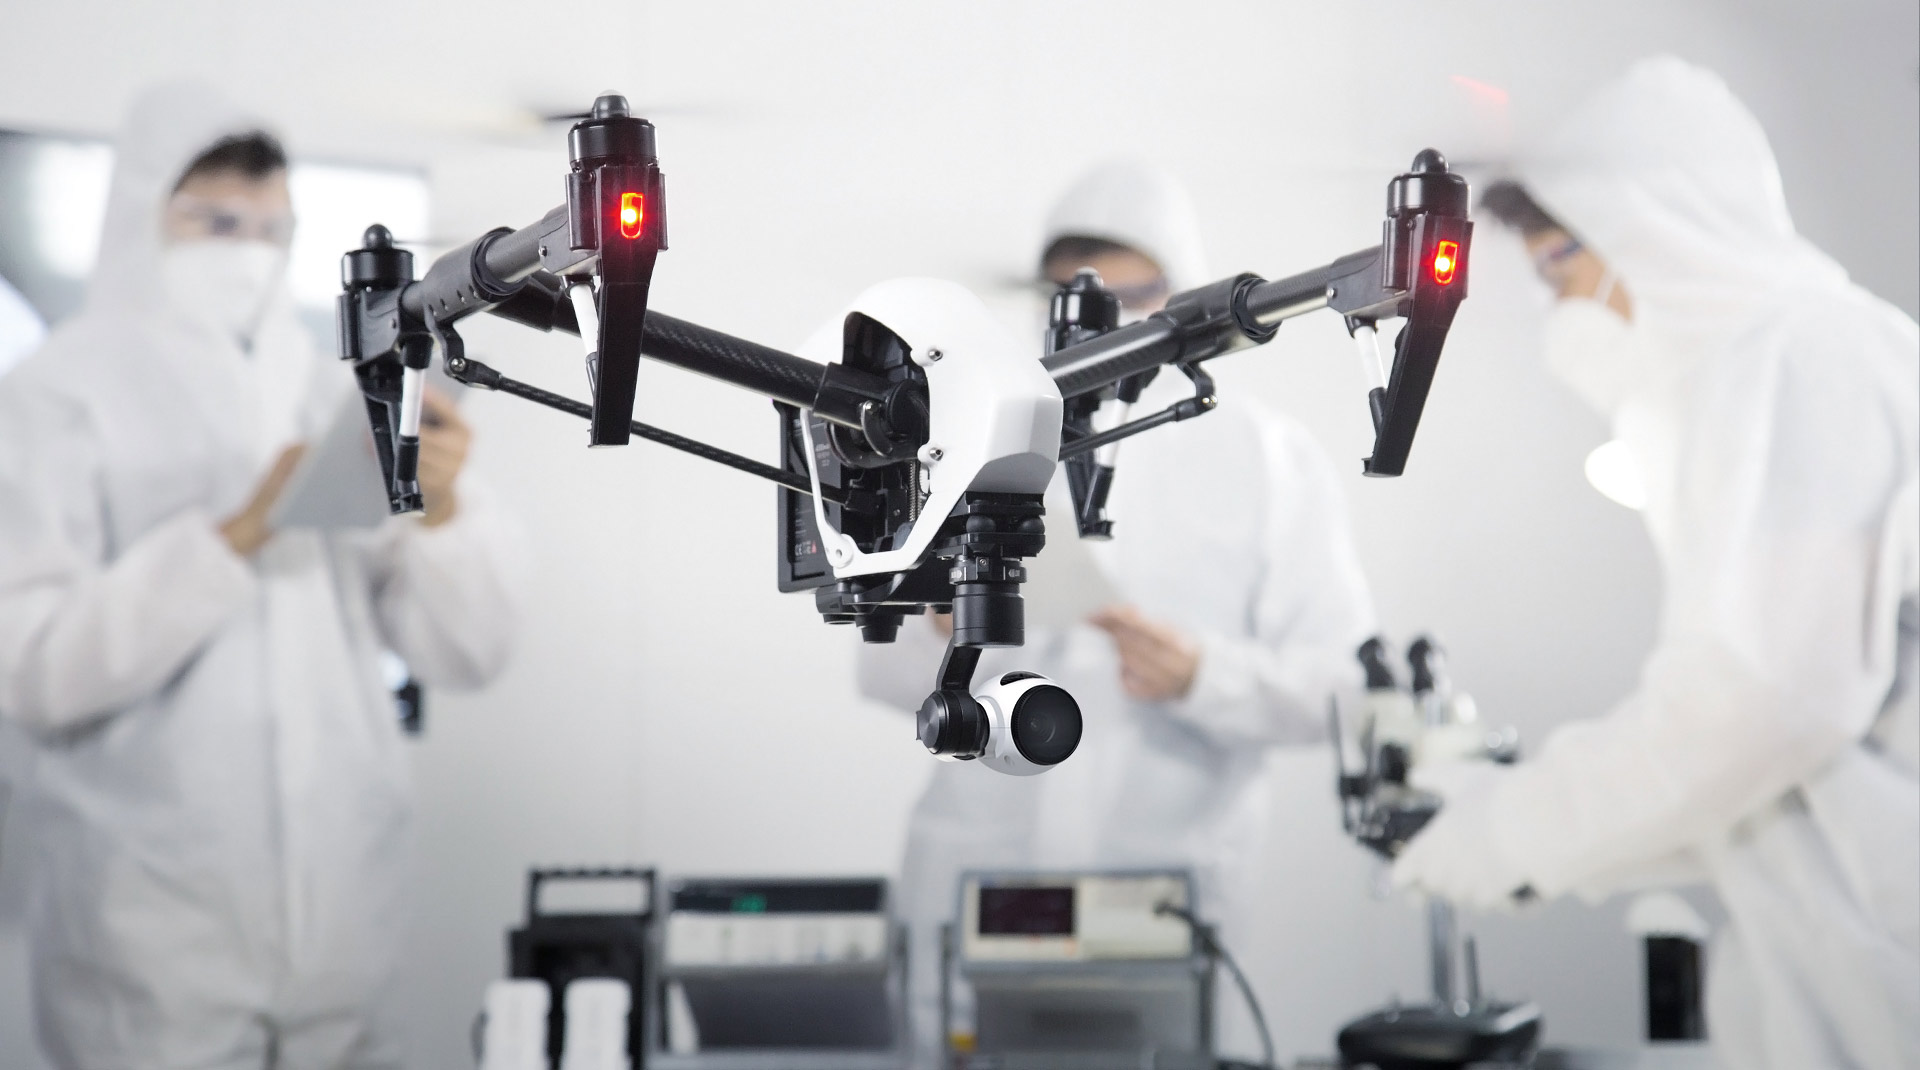 New Dji Inspire 1 Is A Badass Drone Capable Of 4k Videos Igyaan